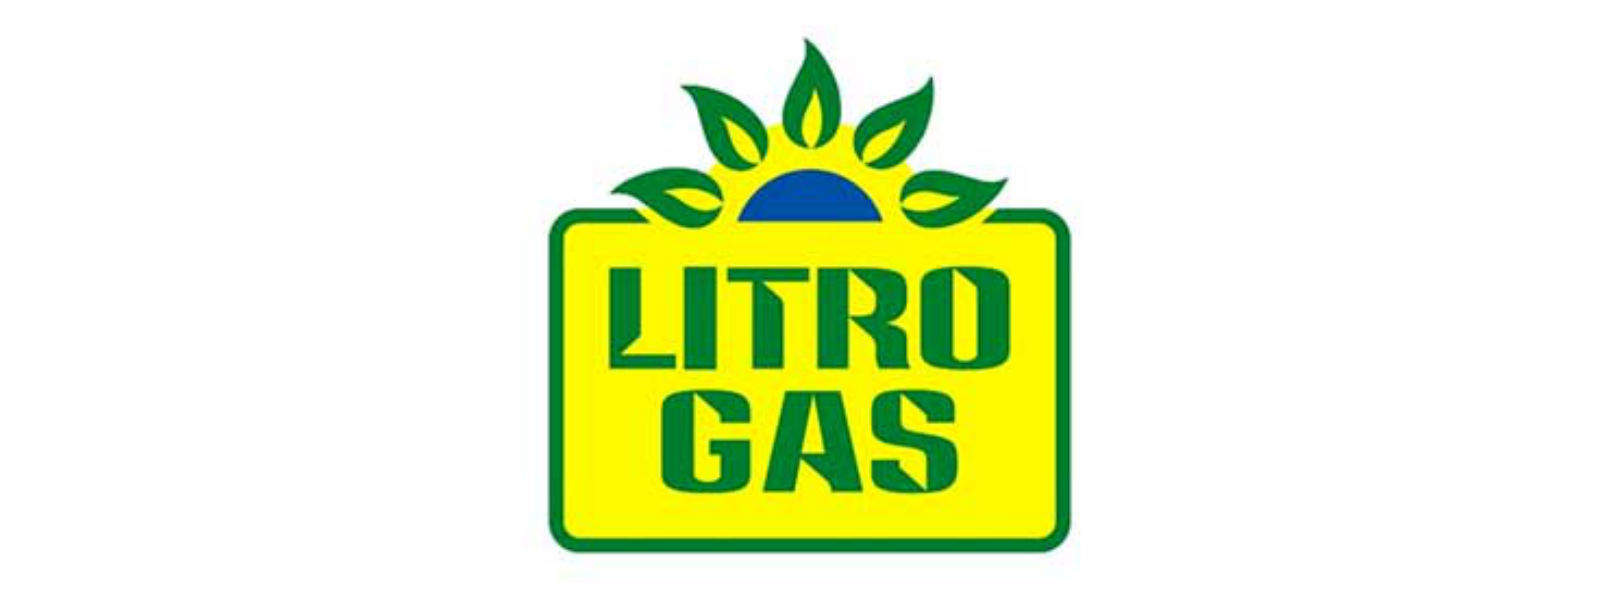 Two more vessels carrying gas enroute to SL: Litro